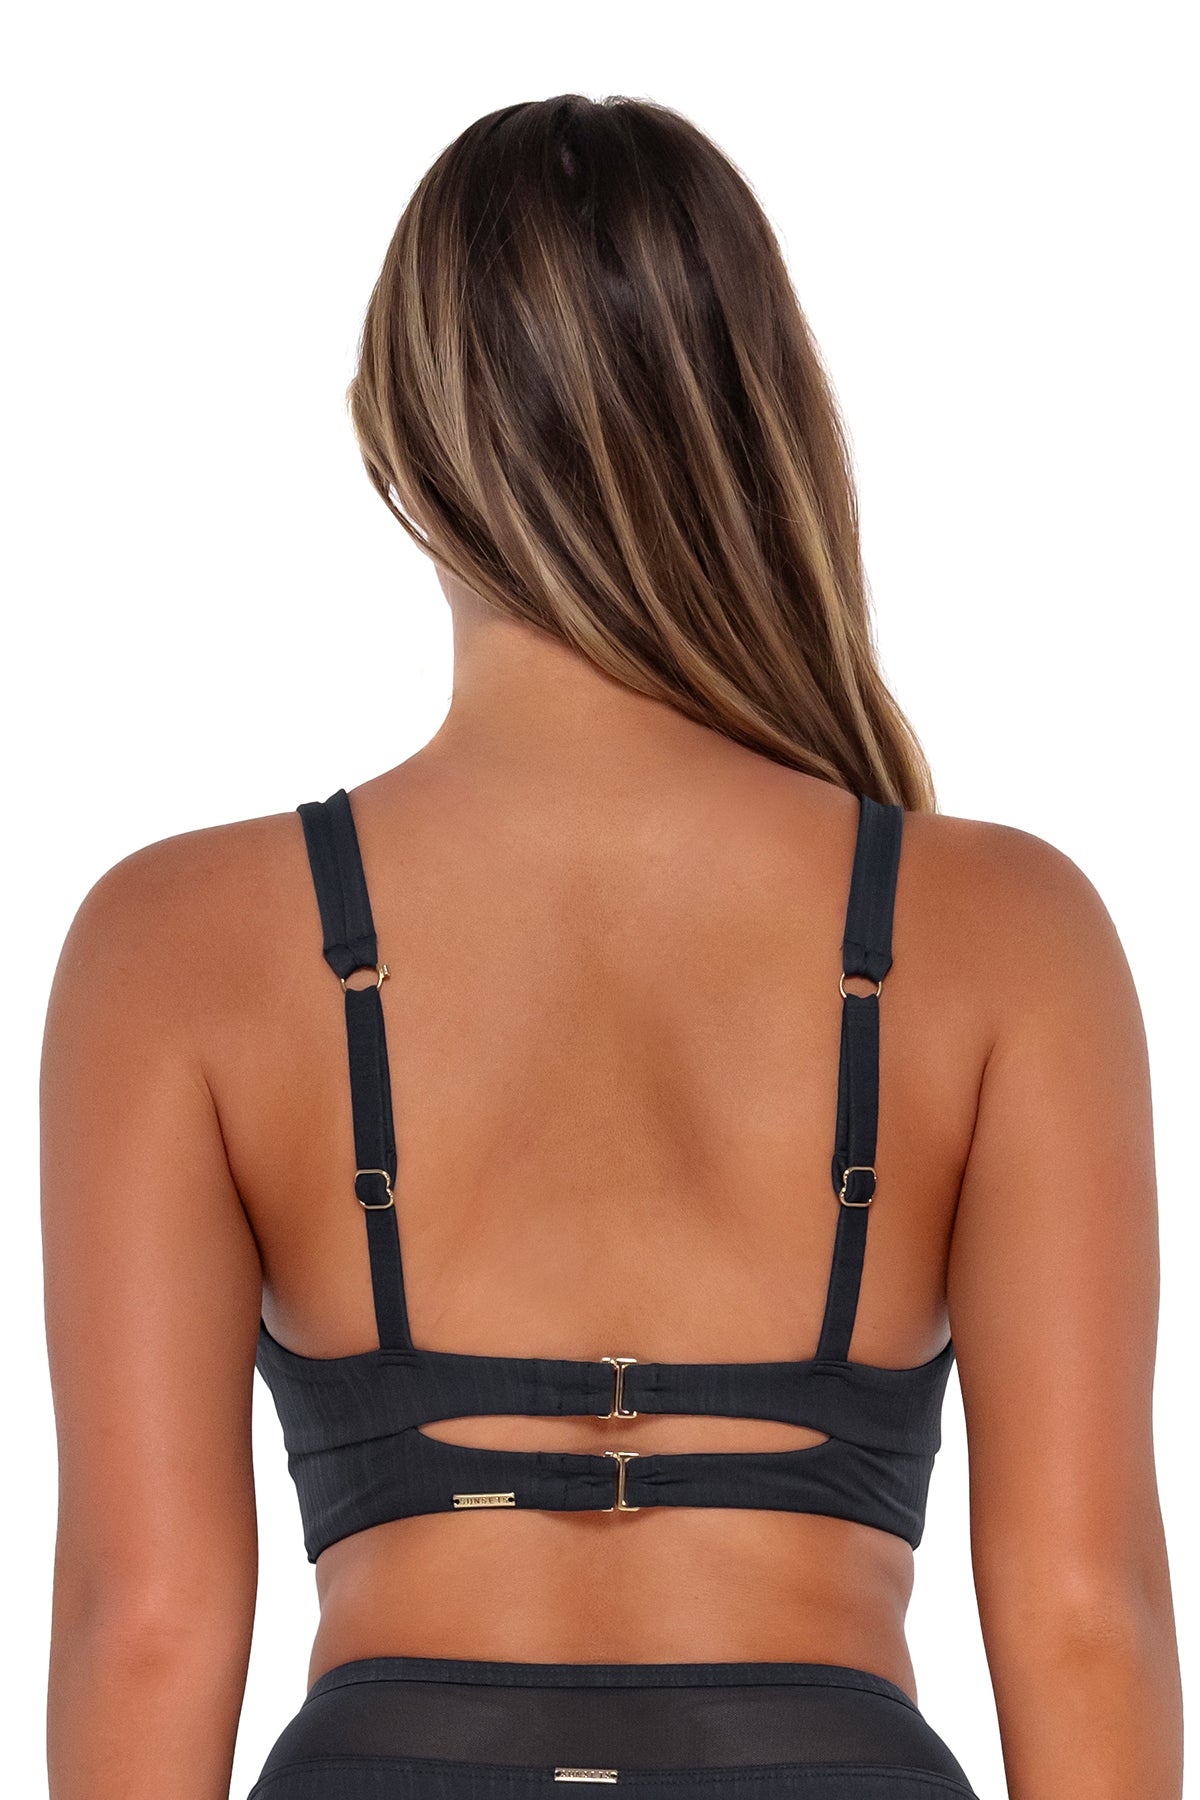 Back pose #2 of Taylor wearing Sunsets Slate Seagrass Texture Danica Top